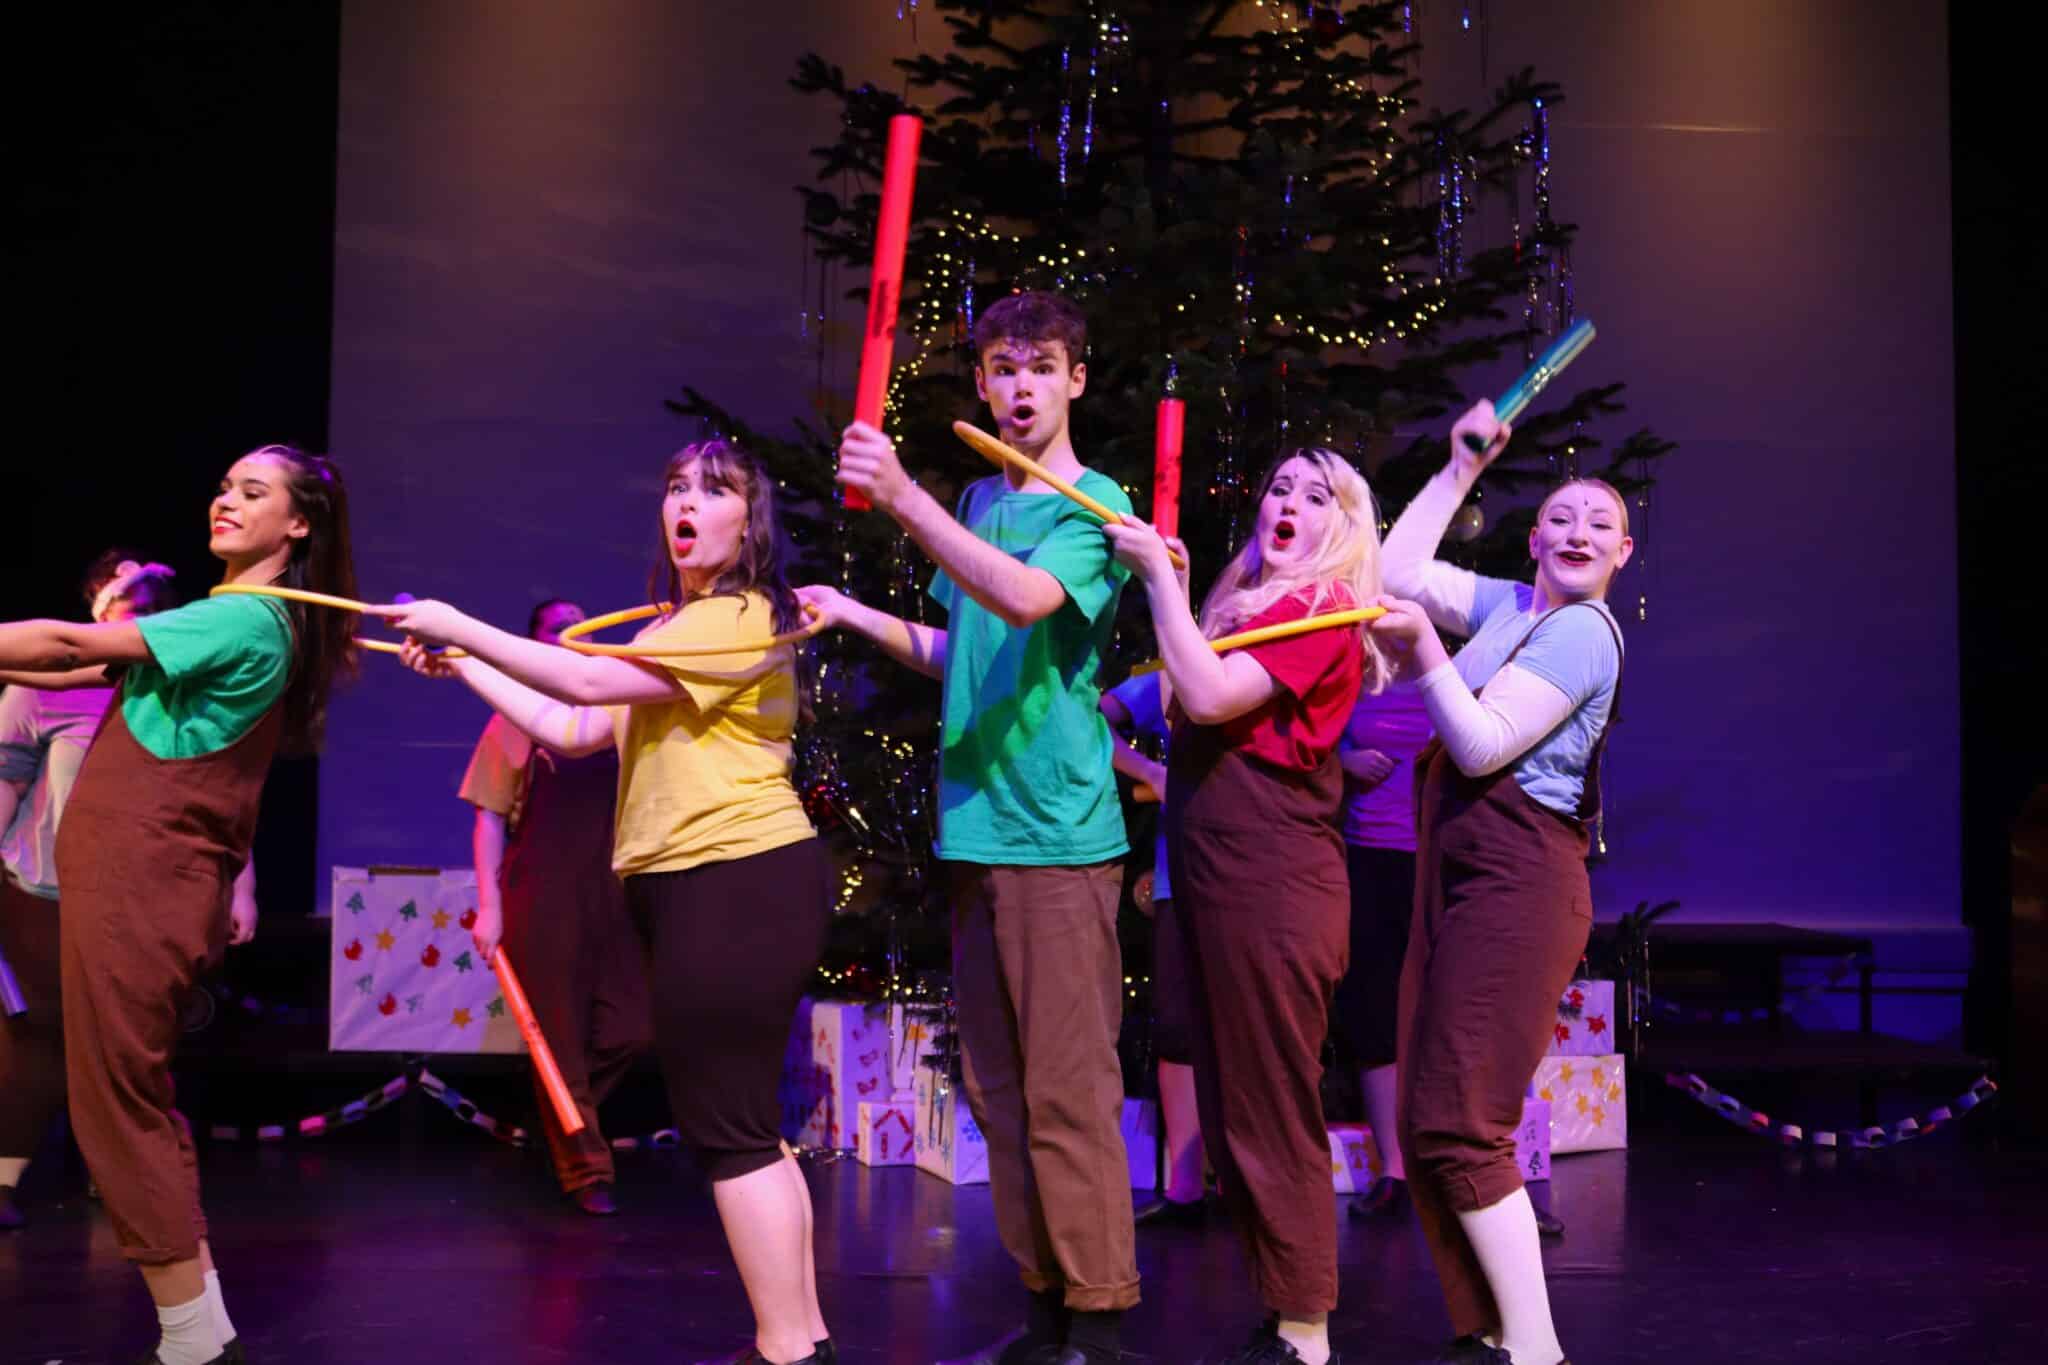 College Christmas variety show a huge hit - boom whackers elves